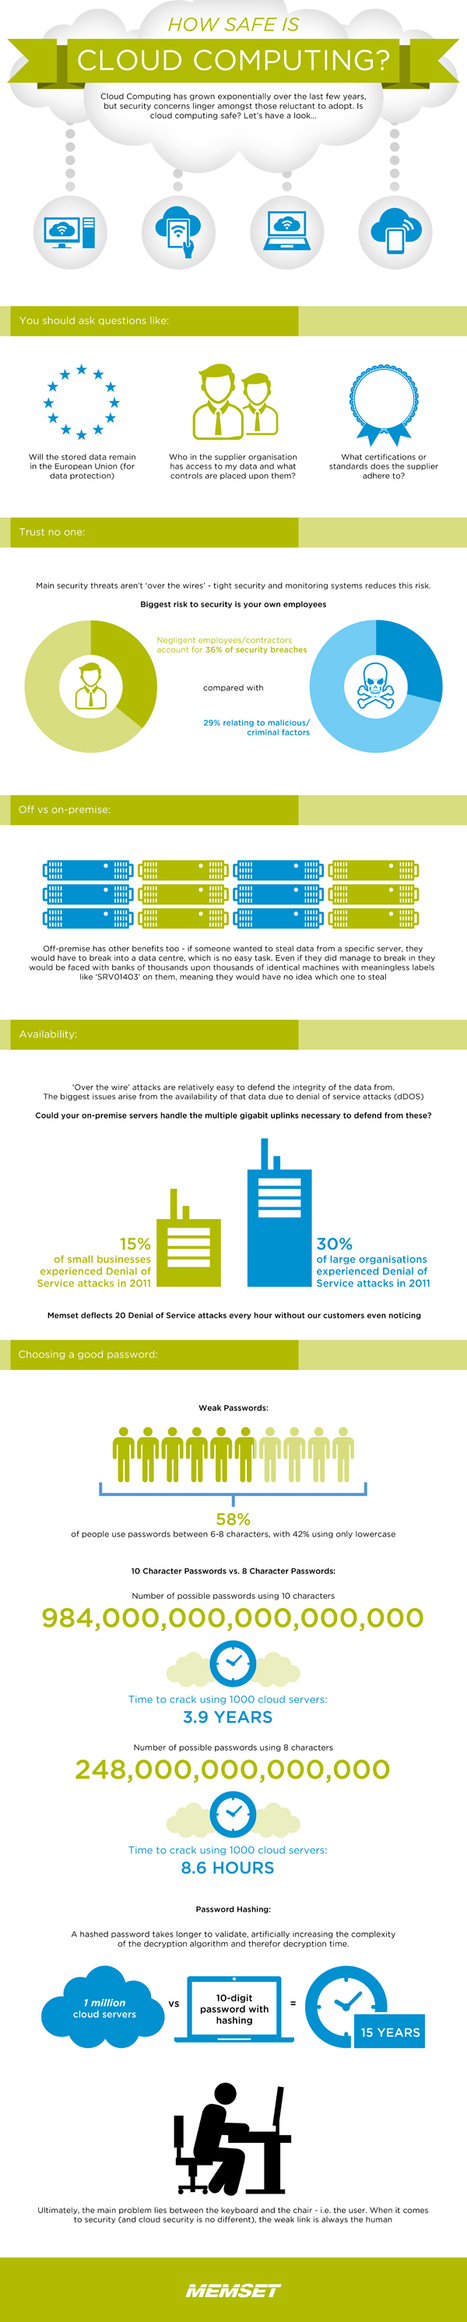 INFOGRAPHIC: How Safe is The Cloud? | Web 2.0 for juandoming | Scoop.it